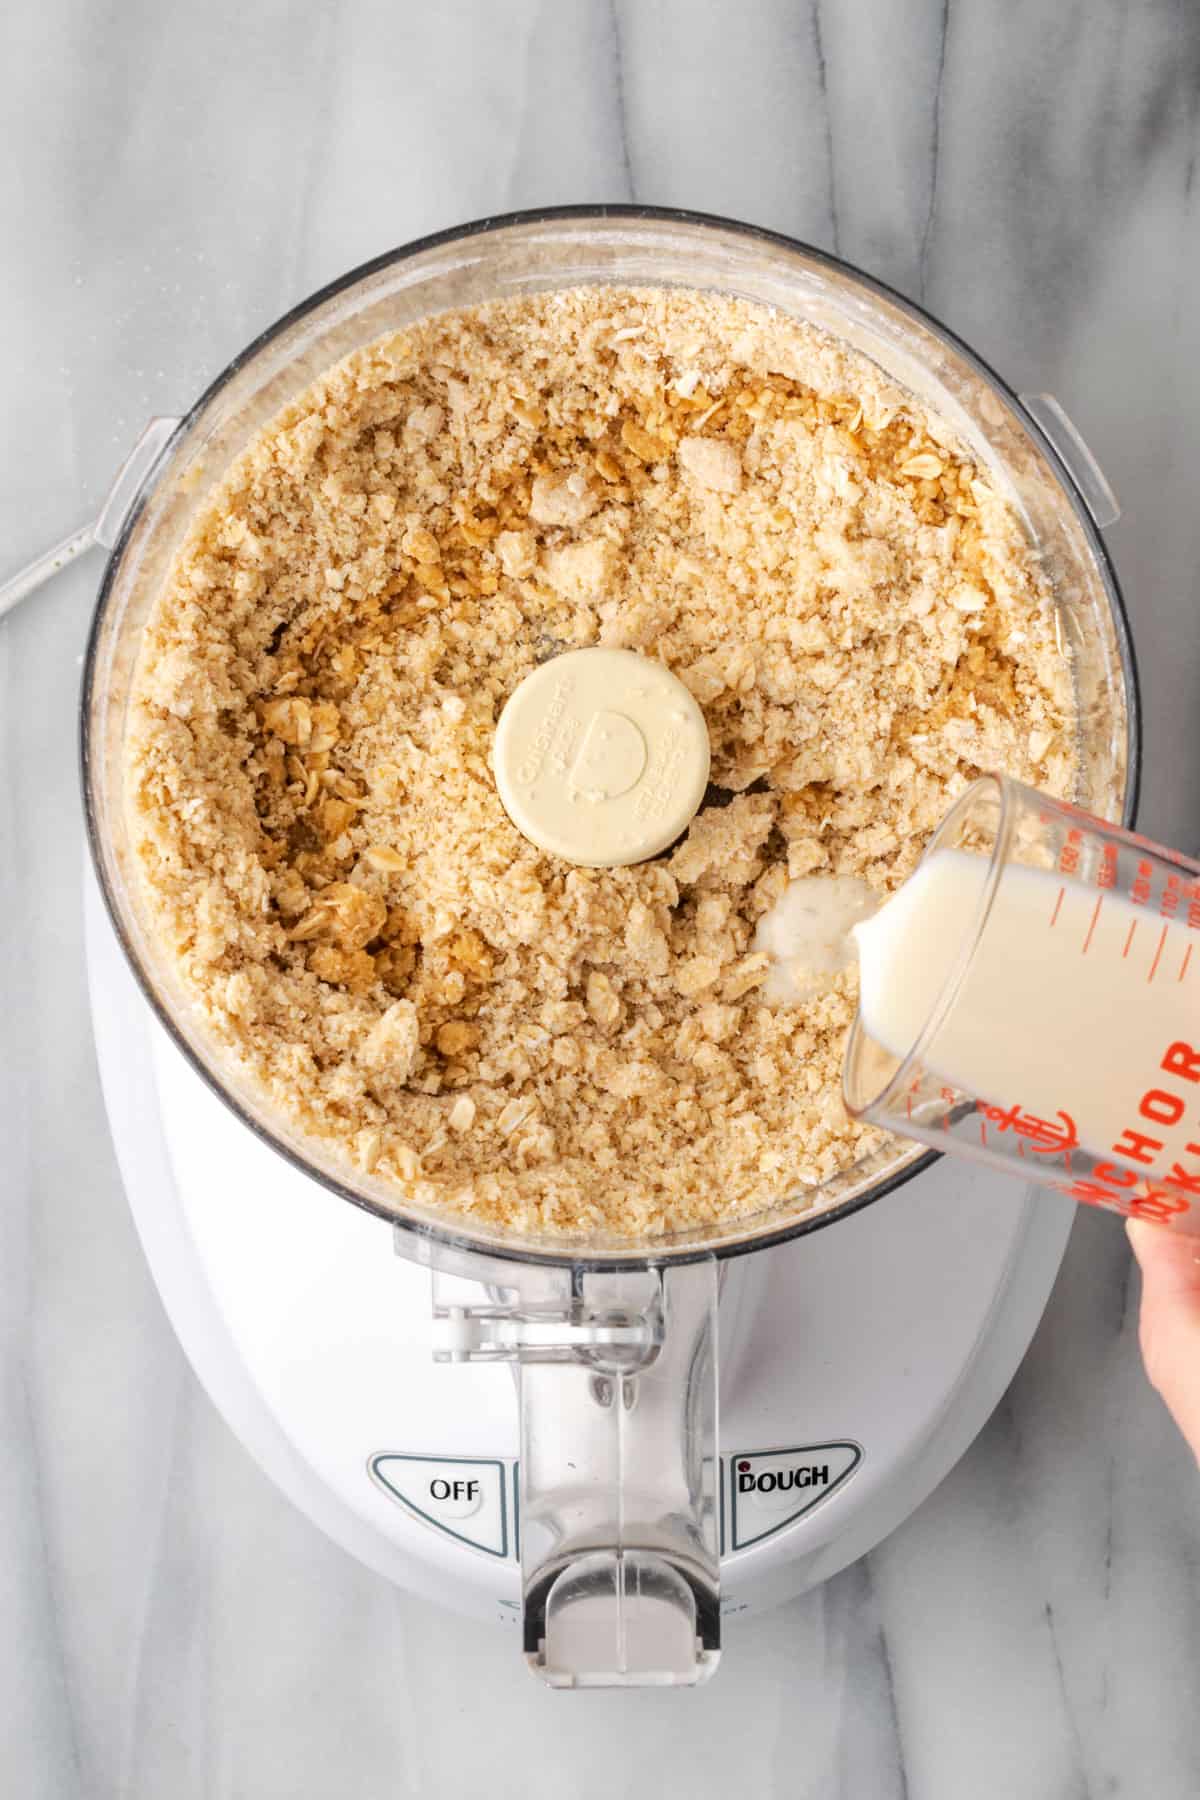 Milk being poured into the partially mixed crust dough in a food processor.